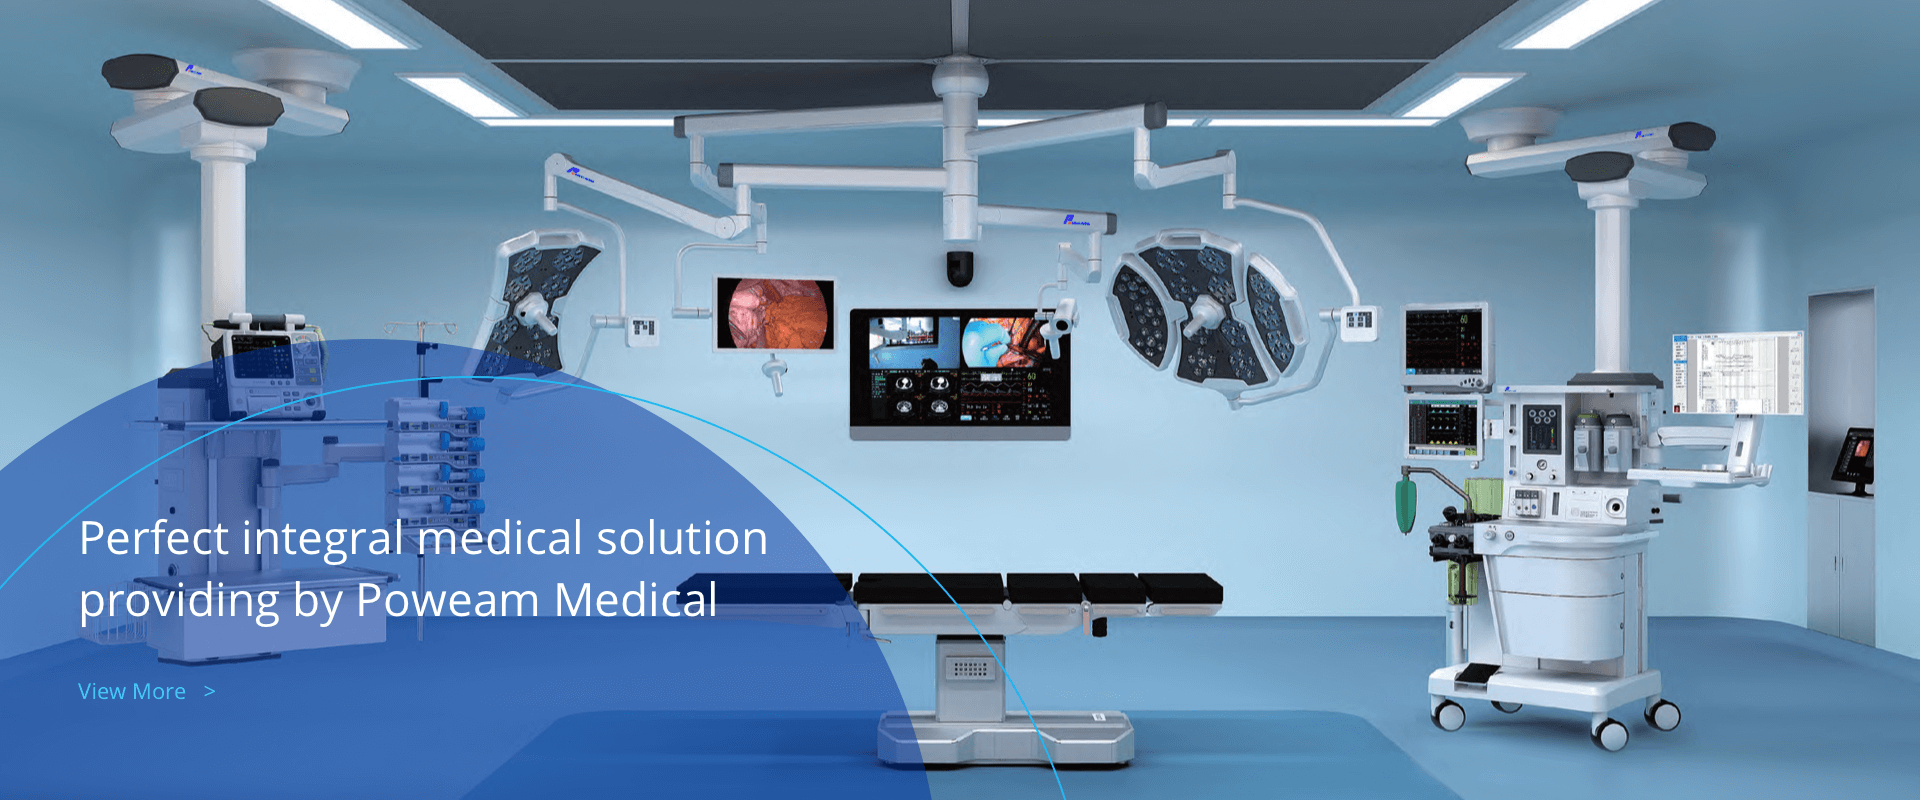 perfect integral medical solution